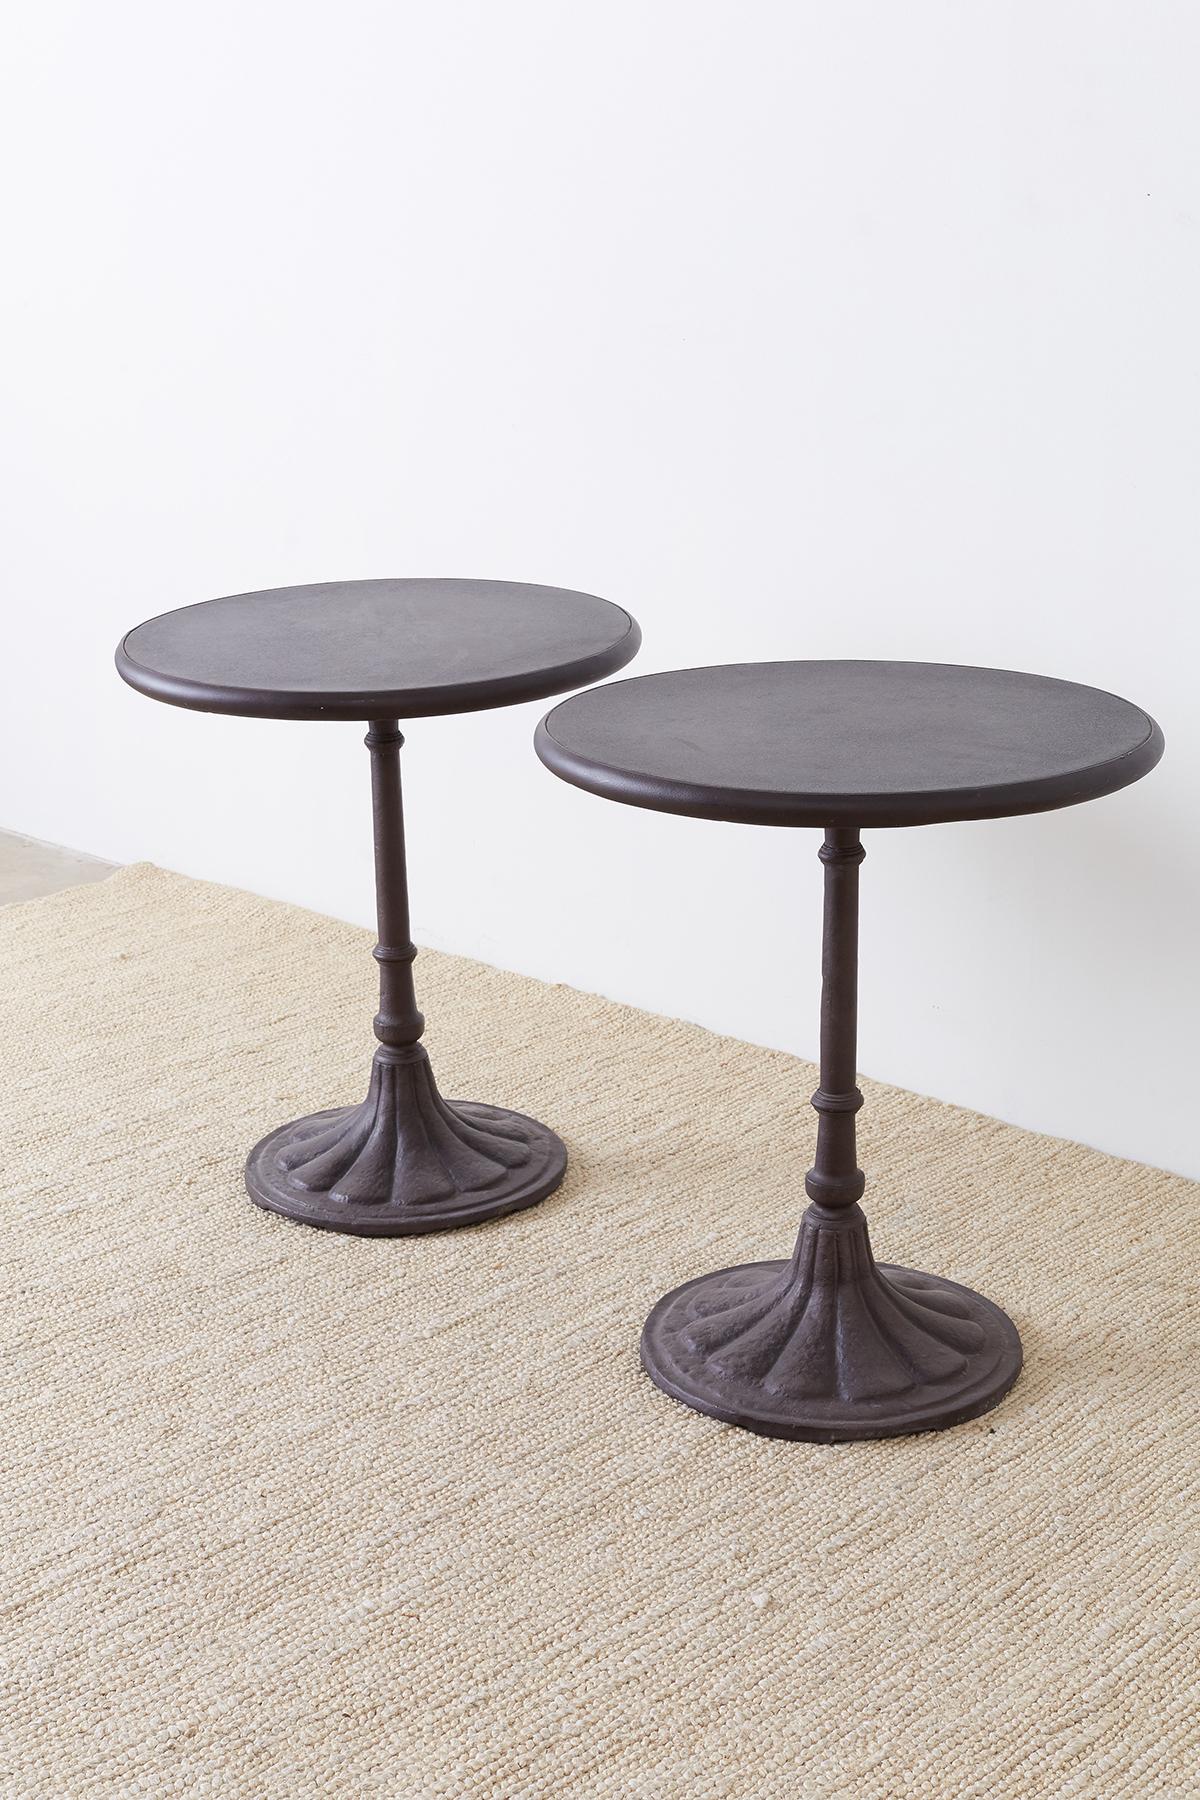 Pair of Parisian Style Iron Bistro Cafe Tables 3